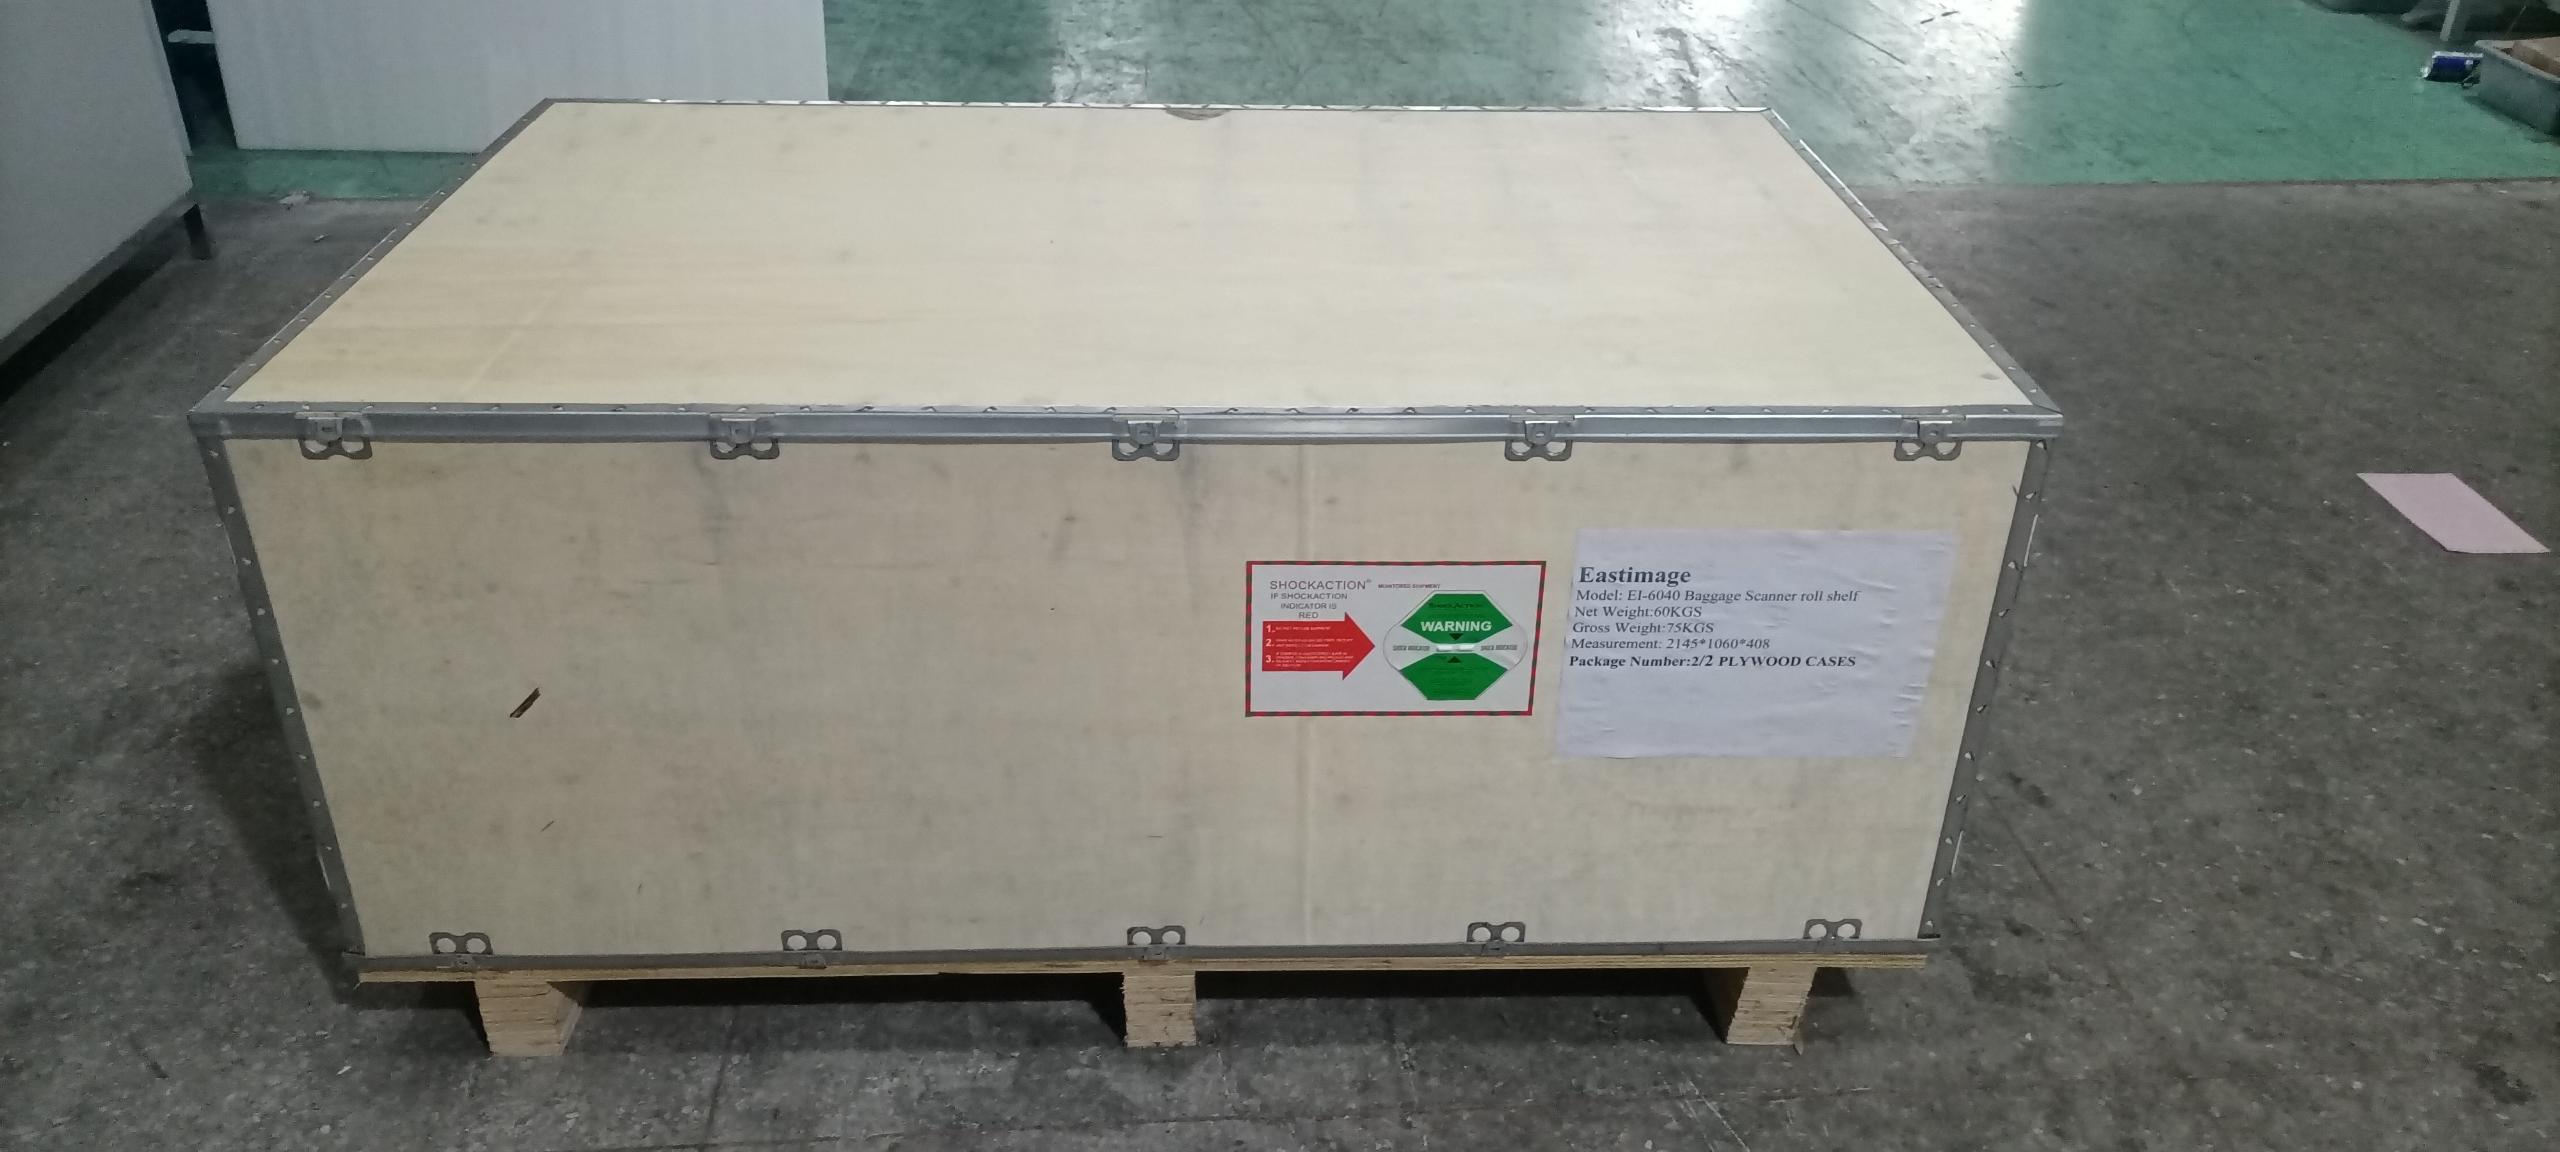 Successful Delivery--Our 6040 Security Screening Machine Successfully Delivered to Greek Customer